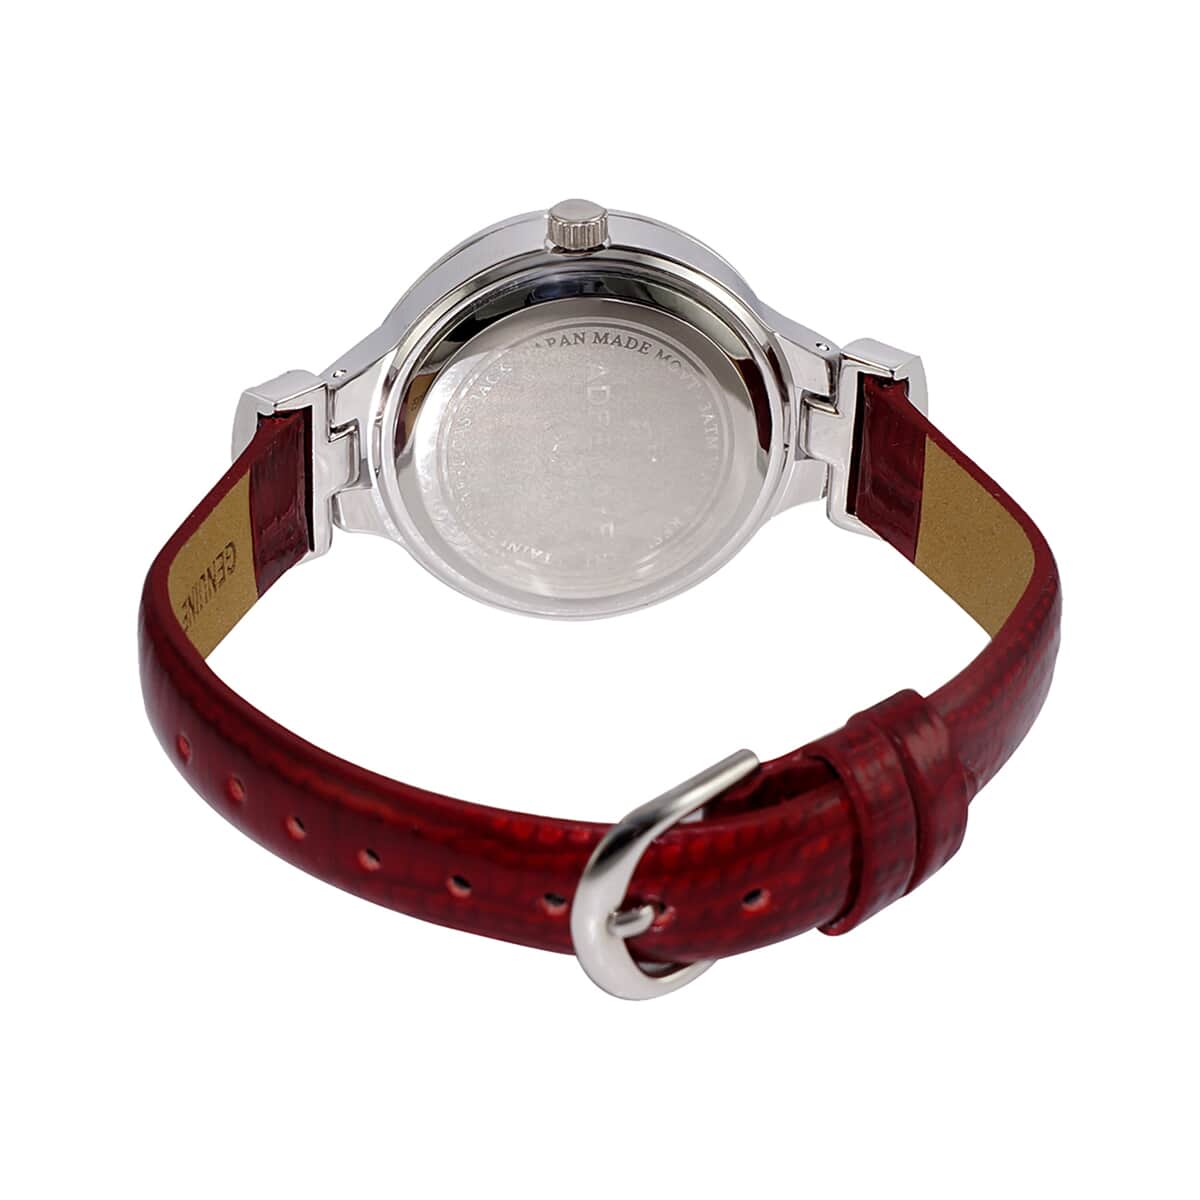 ADEE KAYE Austrian Crystal Japanese Movement Watch in Silvertone and Red Leather Strap (33 mm) image number 2